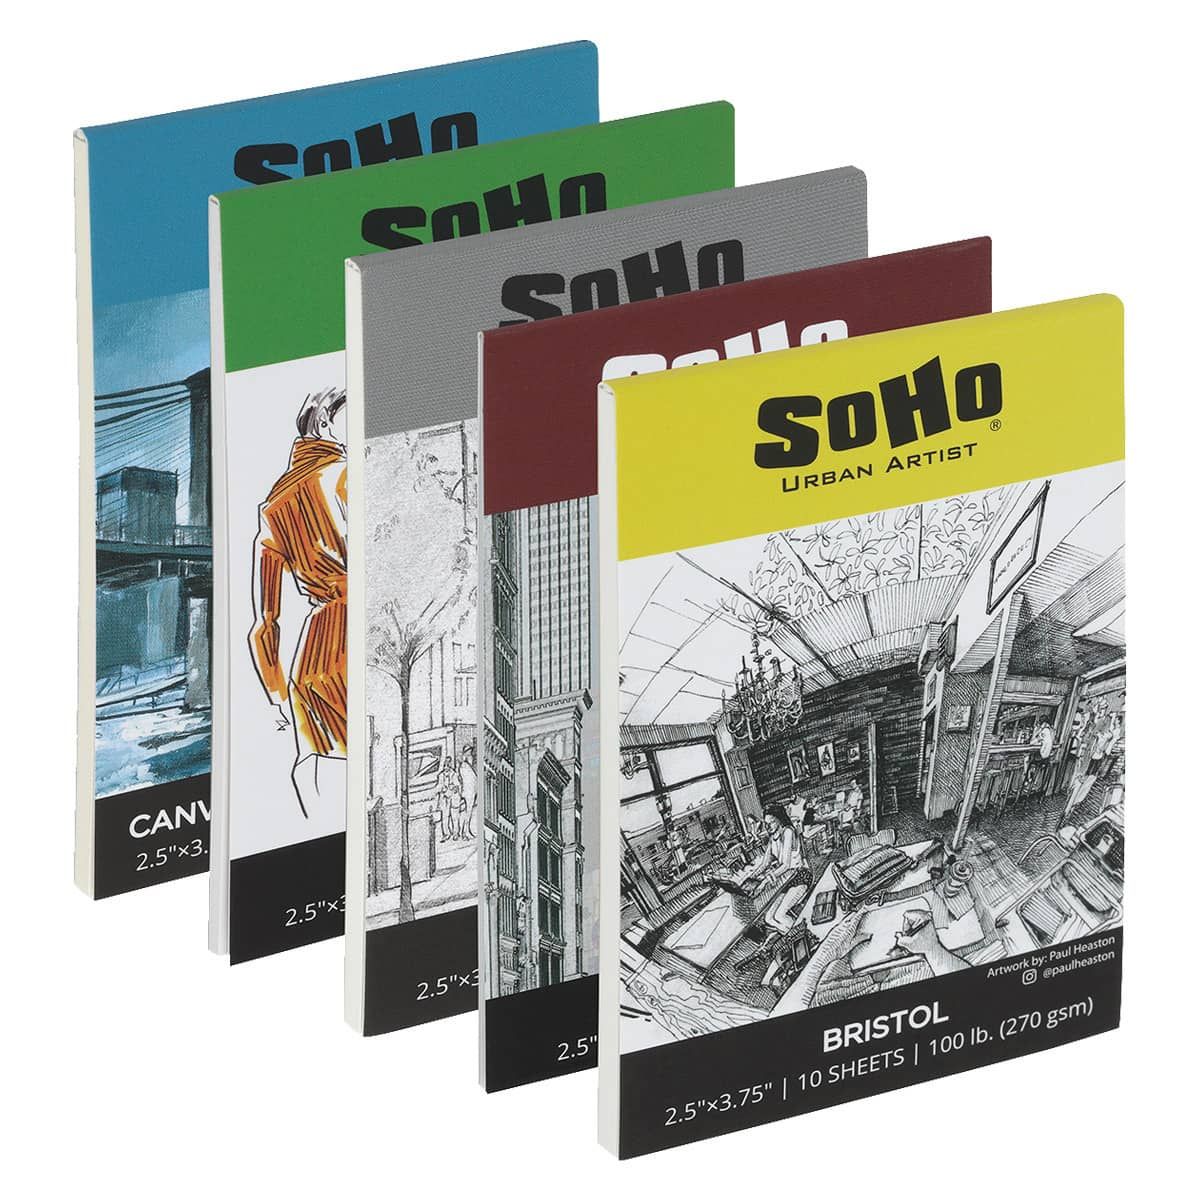 SoHo Urban Artist Acrylic Canvas Pads - Textured Canvas Paper Pad for  Painting, Drawing, Pastels, Travel, & More! - [Single - 8x8]